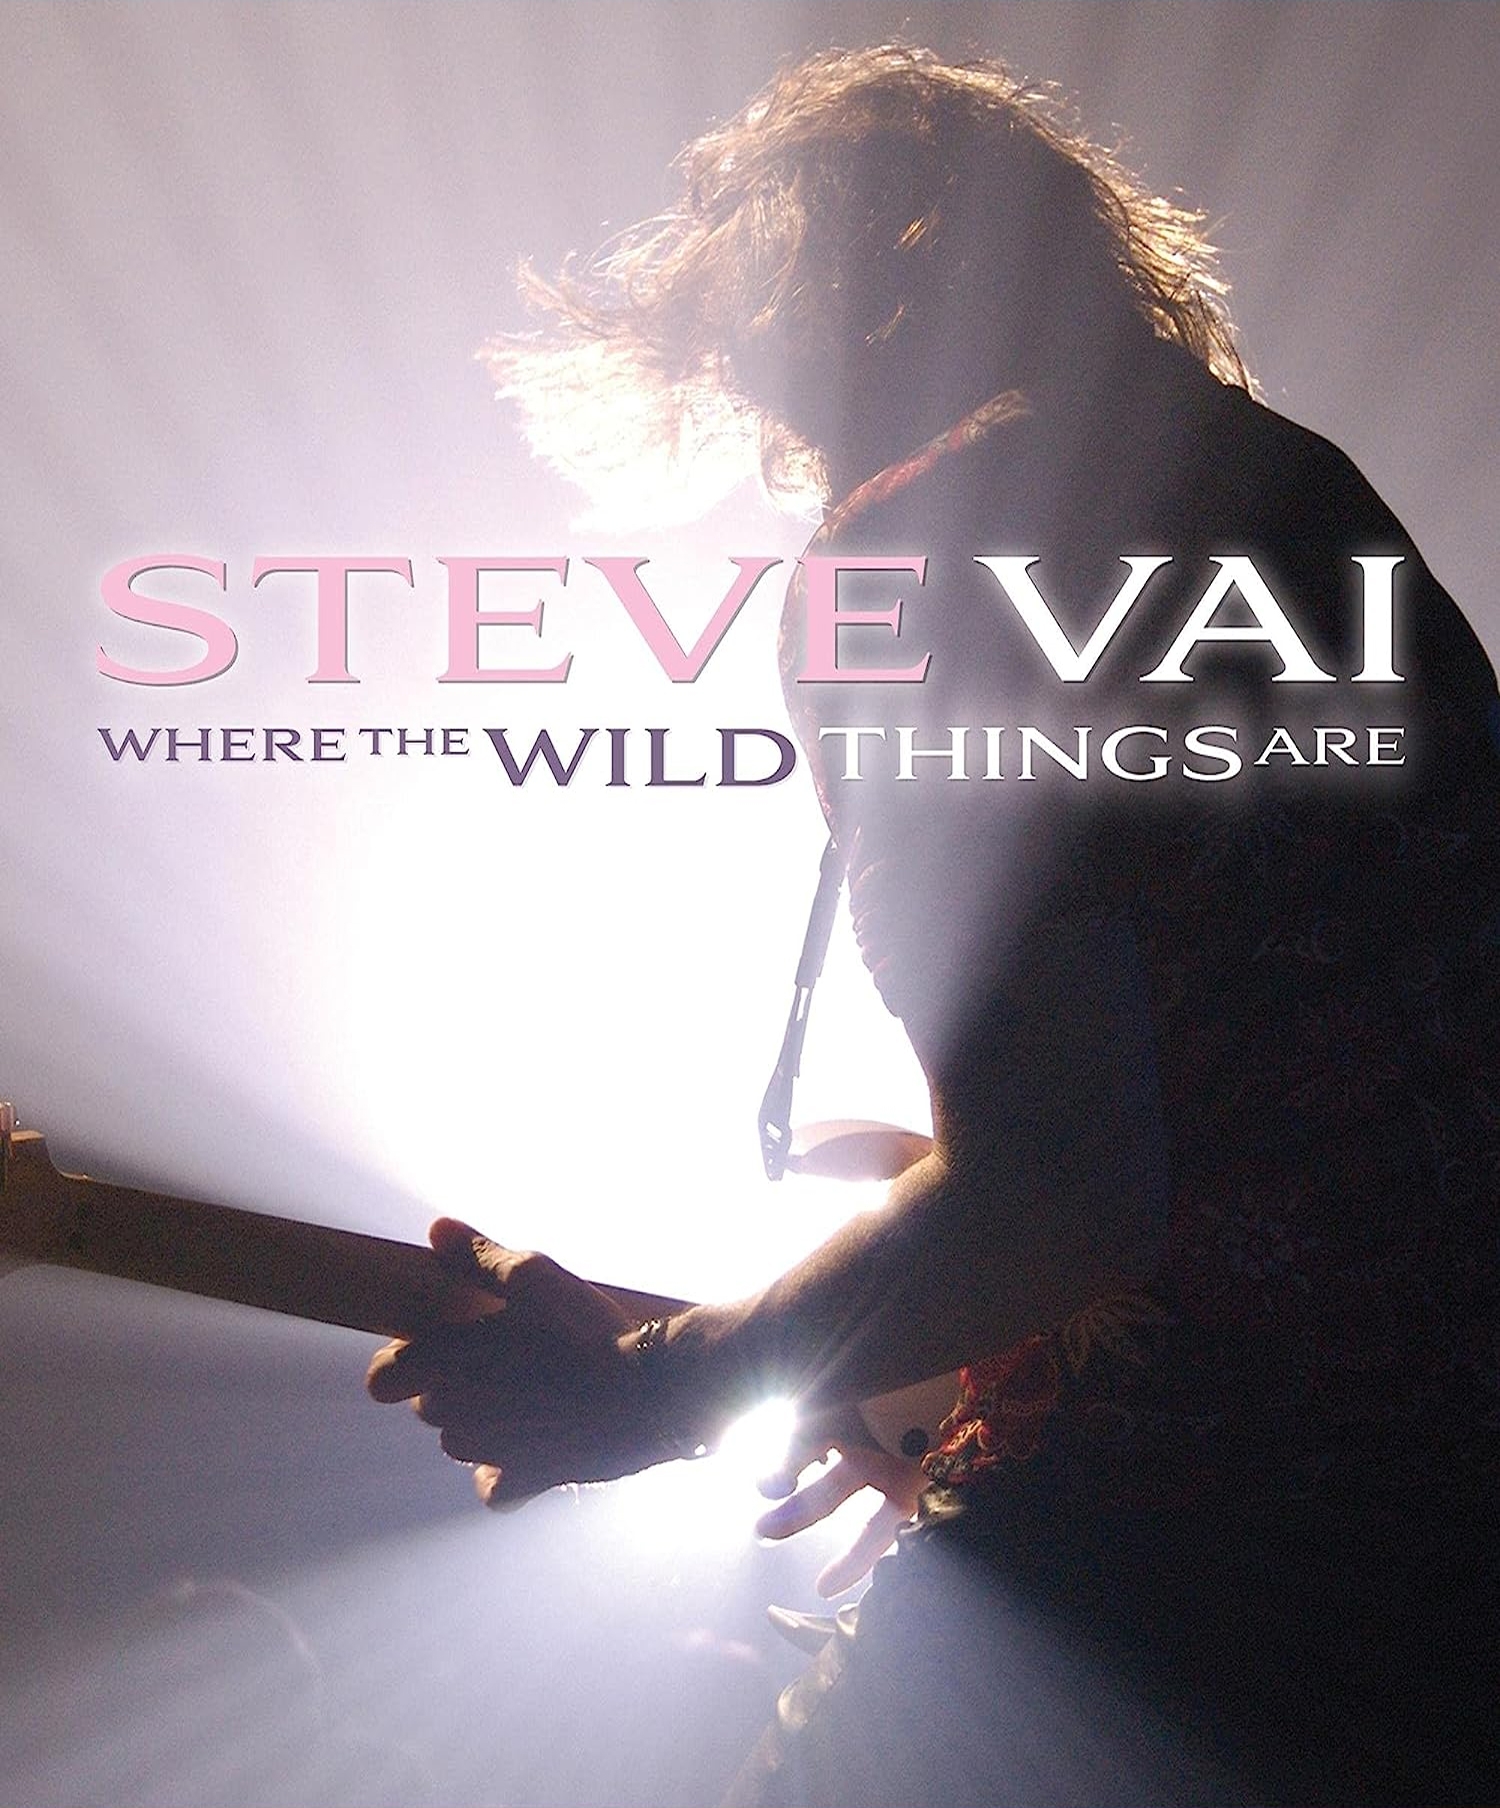 Where the wild things are | Steve Vai | stevevai.it